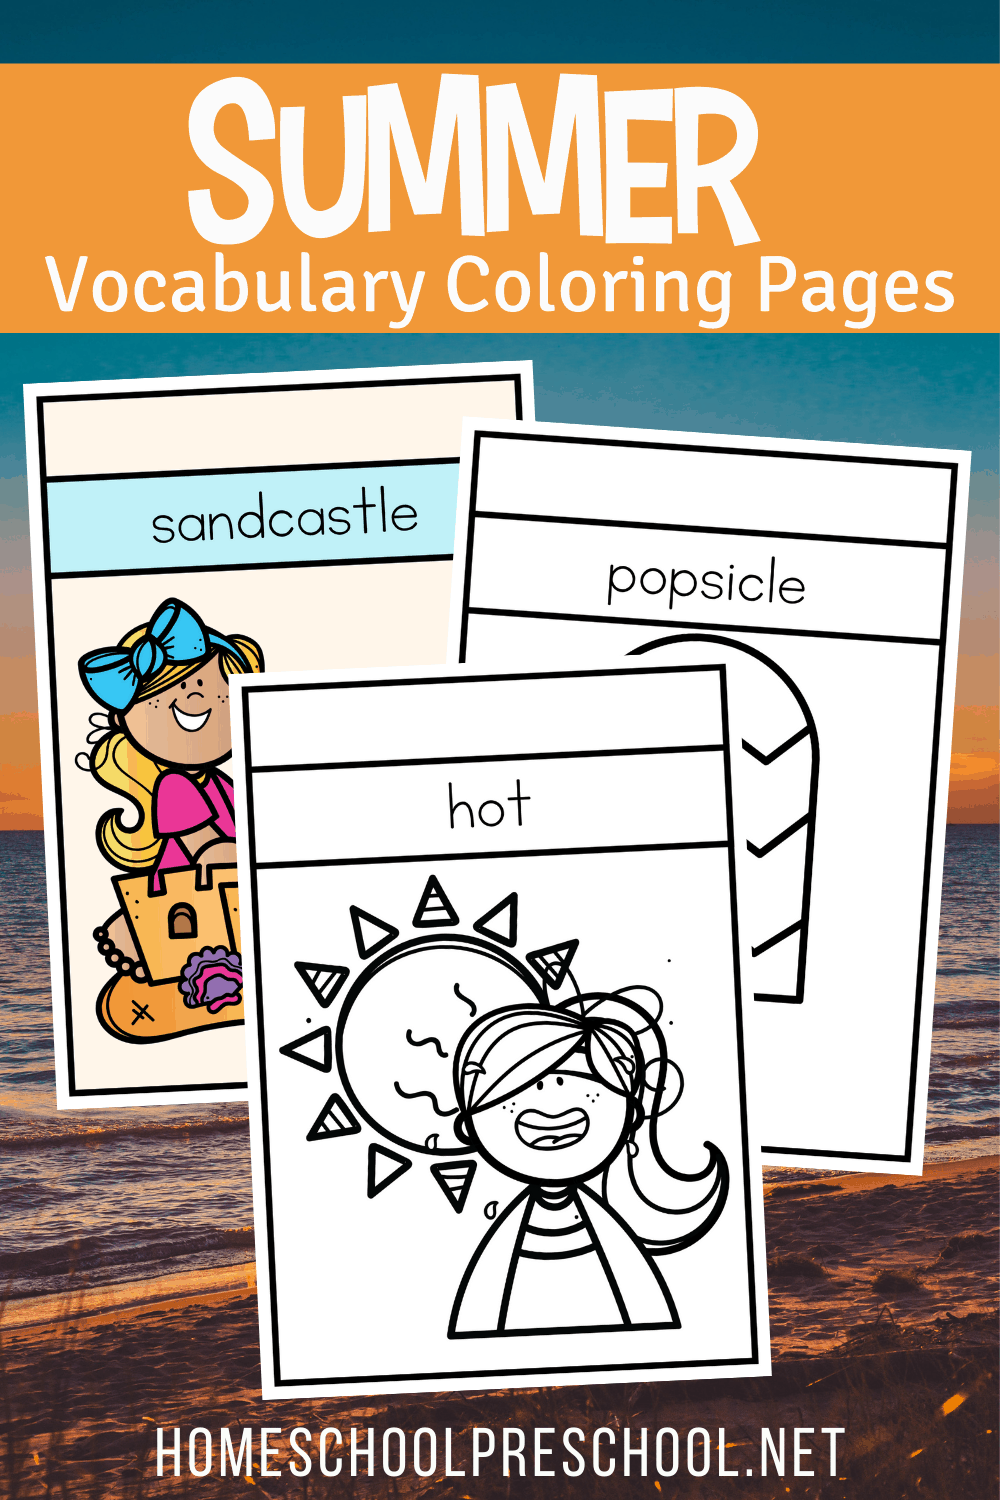 summer-vocab-1 Summer Vocabulary Coloring Pages